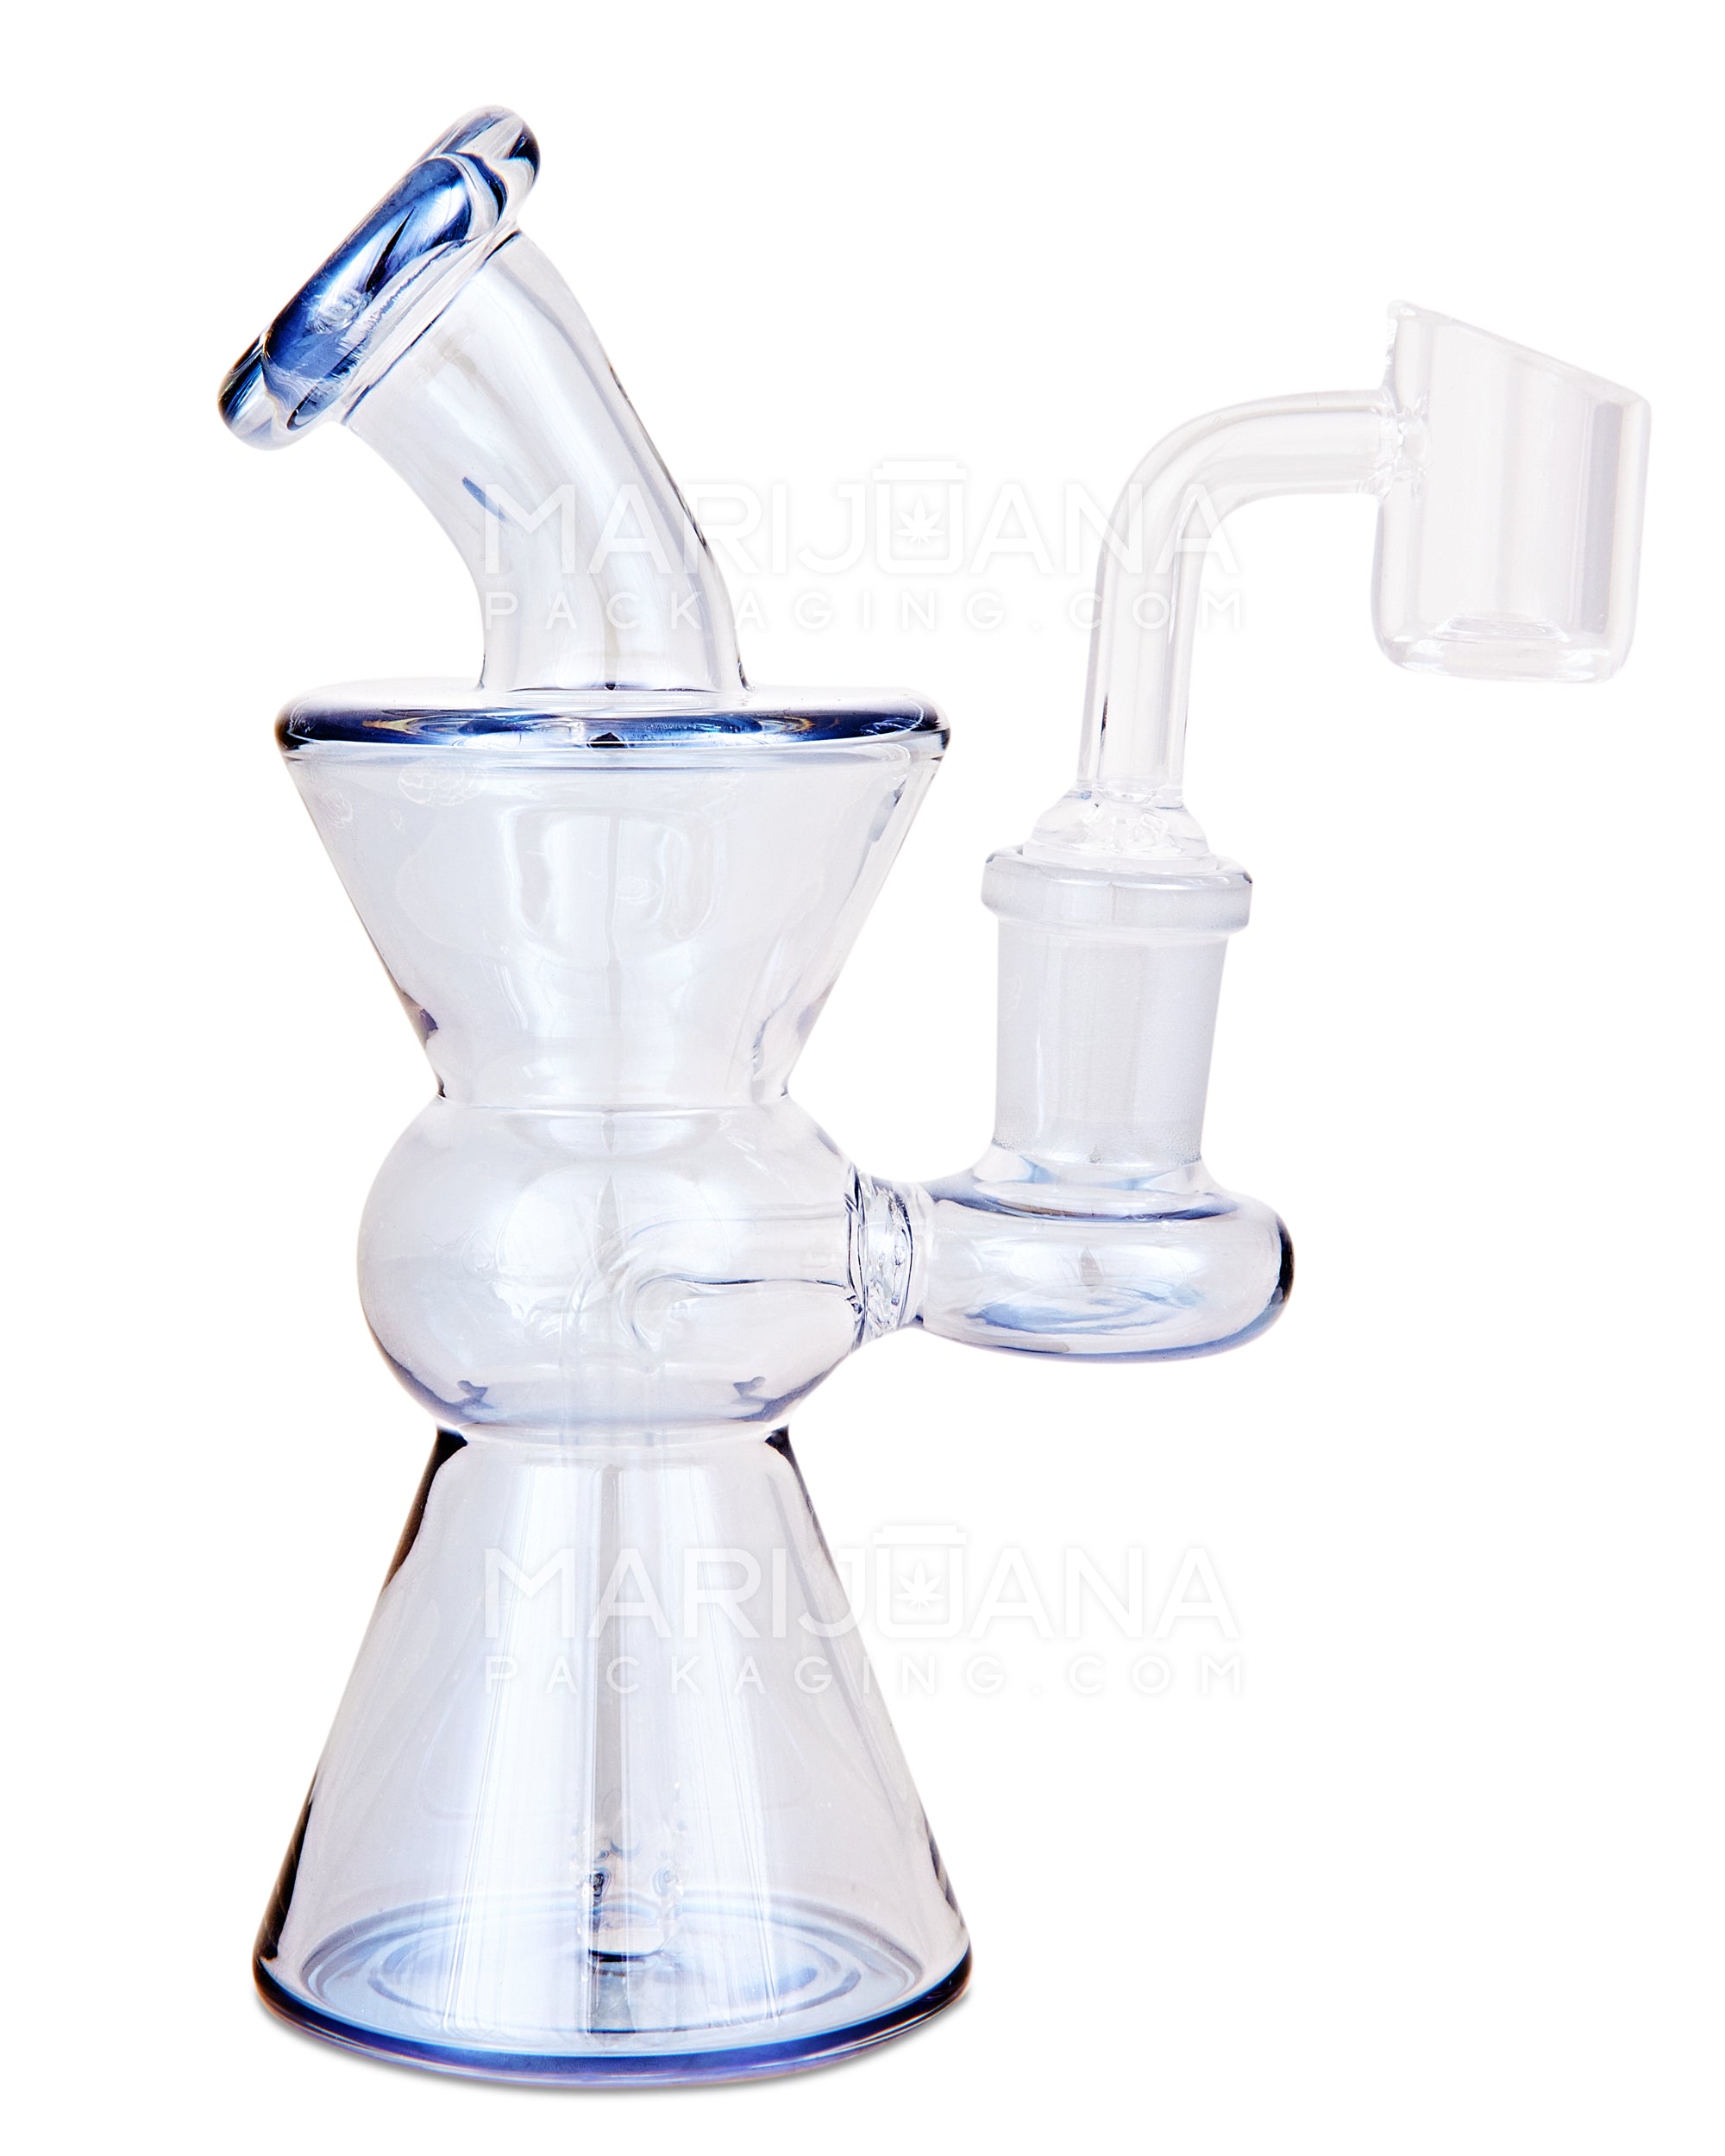 Bent Neck Hourglass Glass Dab Rig | 6in Tall - 14mm Banger - Smoke - 1